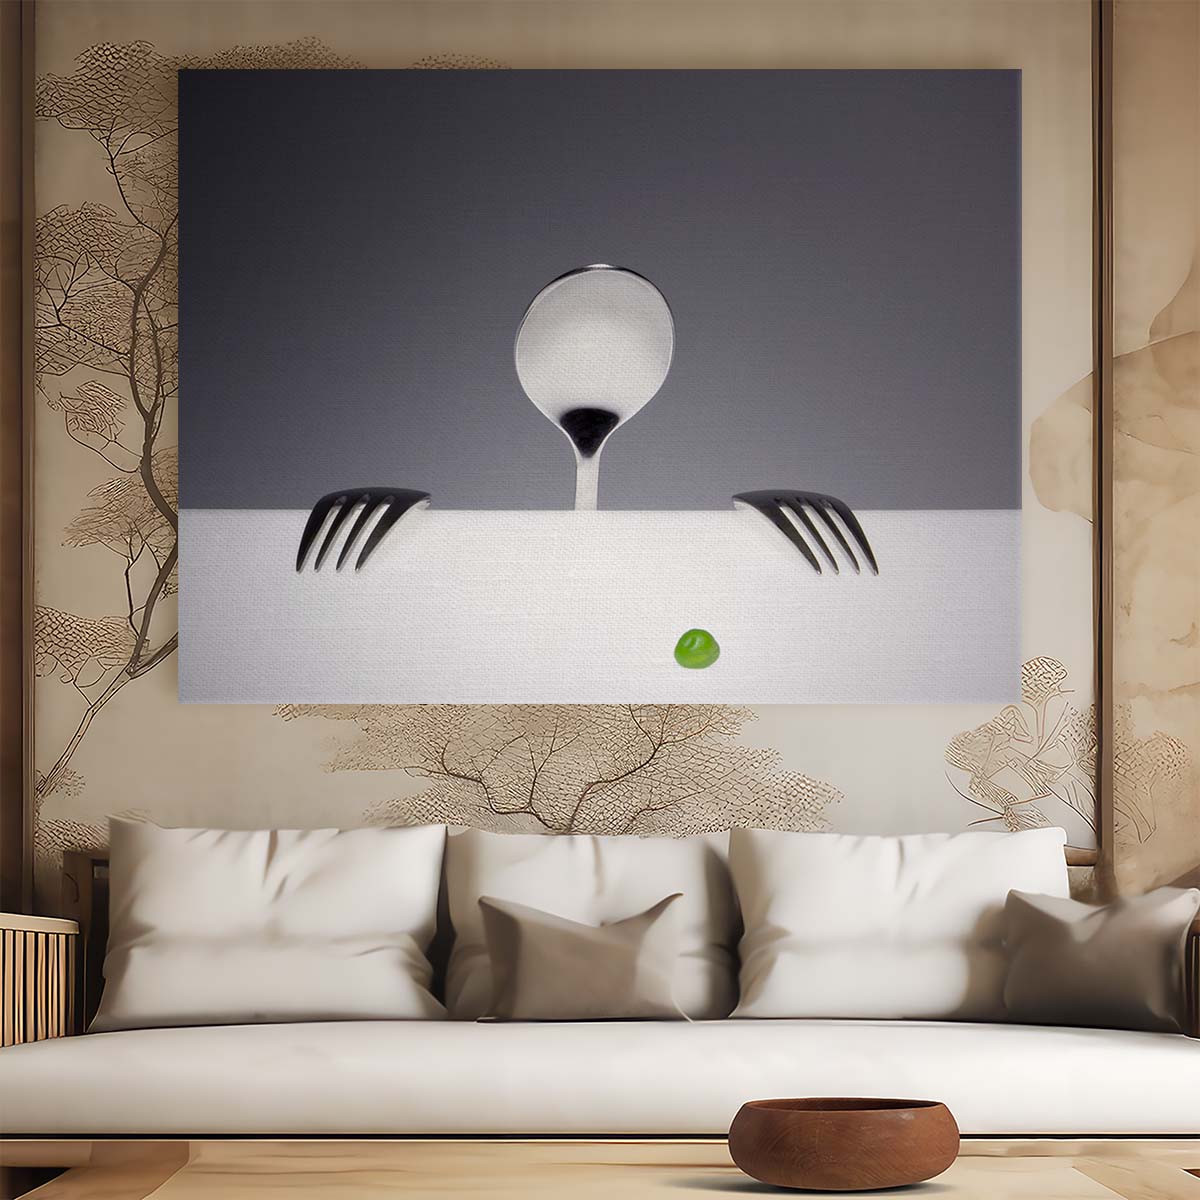 Hungry Cutlery & Peas Humorous Kitchen Wall Art by Luxuriance Designs. Made in USA.